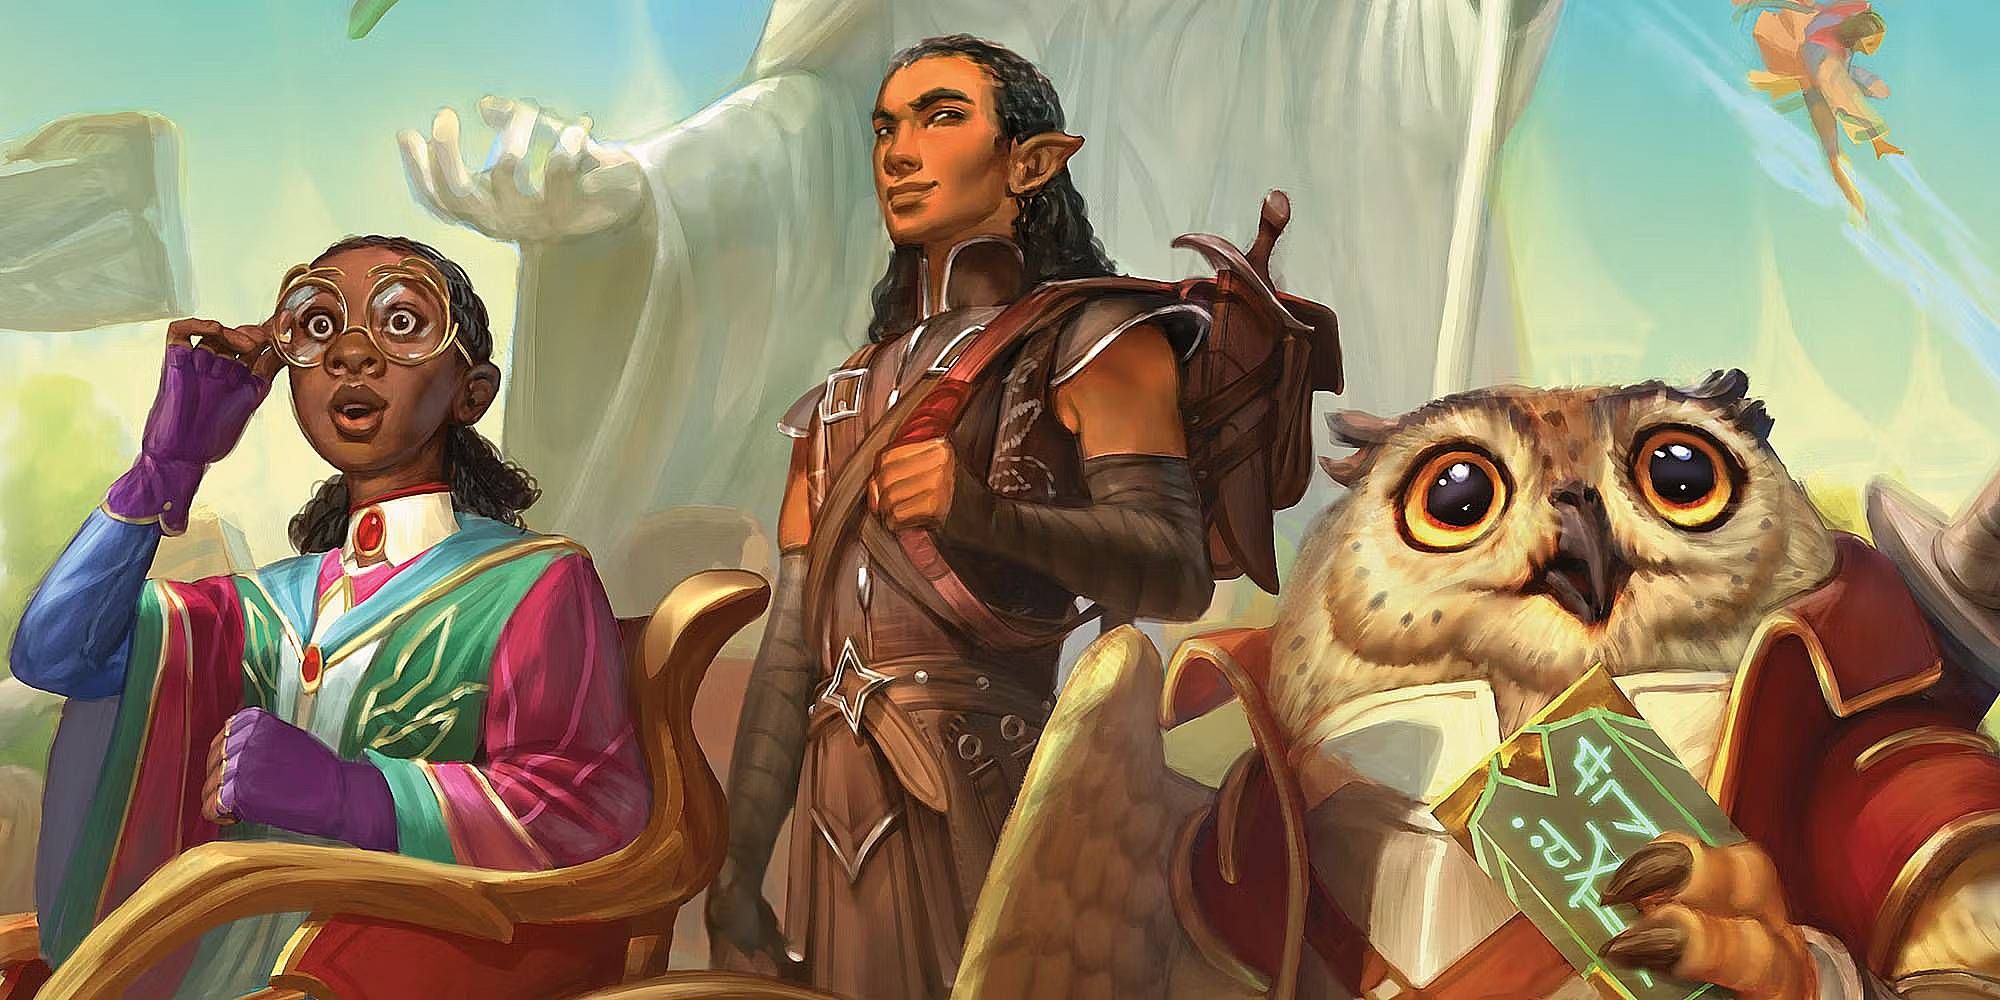 Three figures, a young, dark-skinned woman, a half-elf, and an owl look around in wonder.